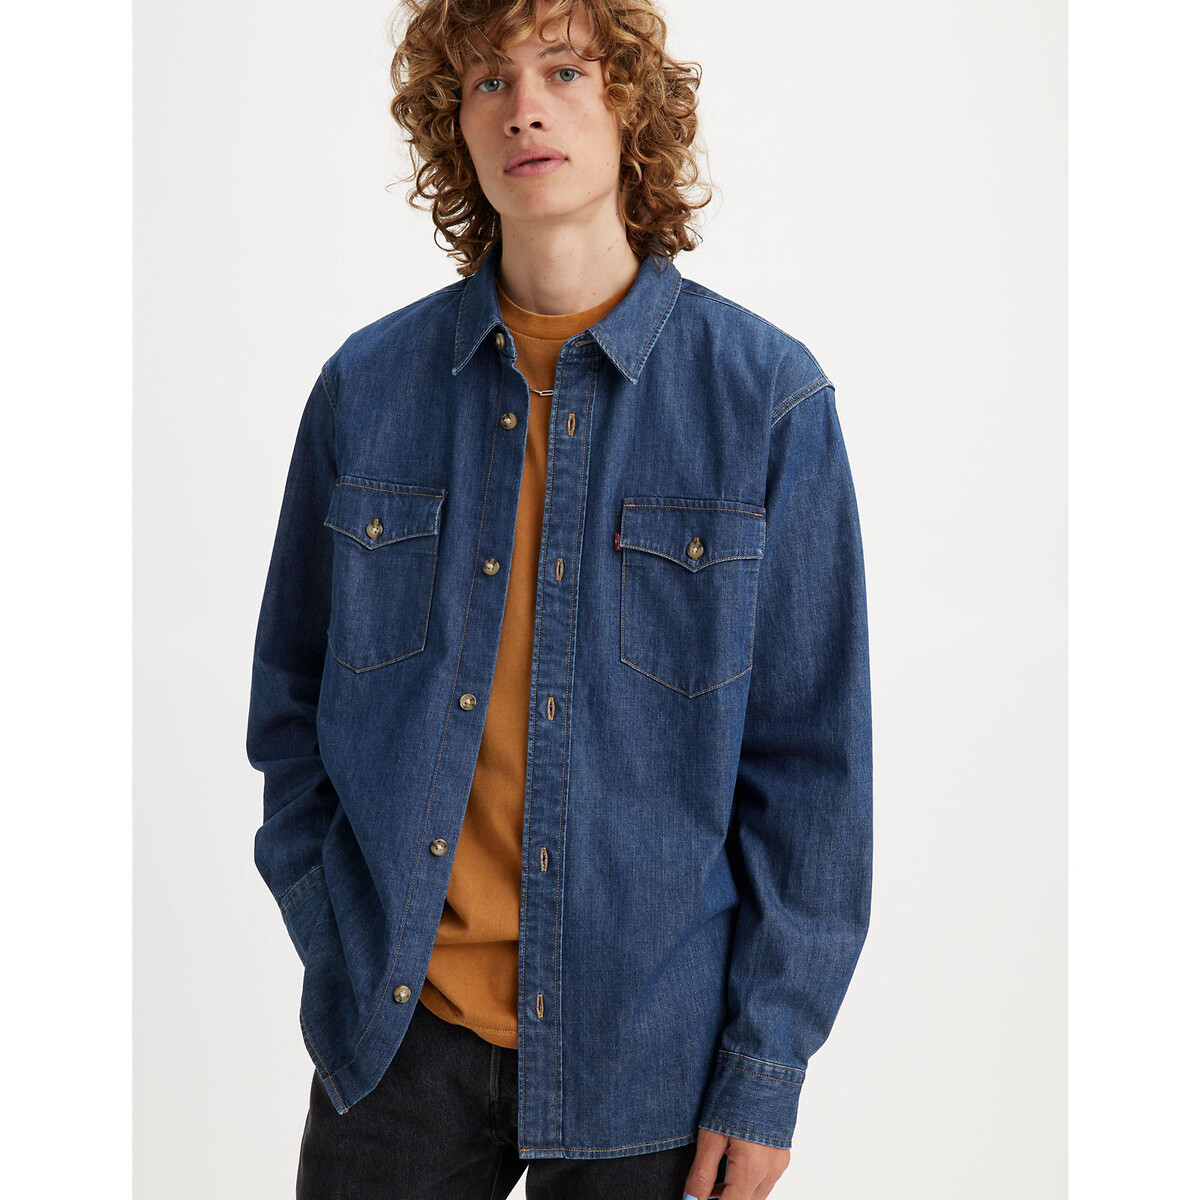 Image of Denim Western Shirt, Relaxed Fit